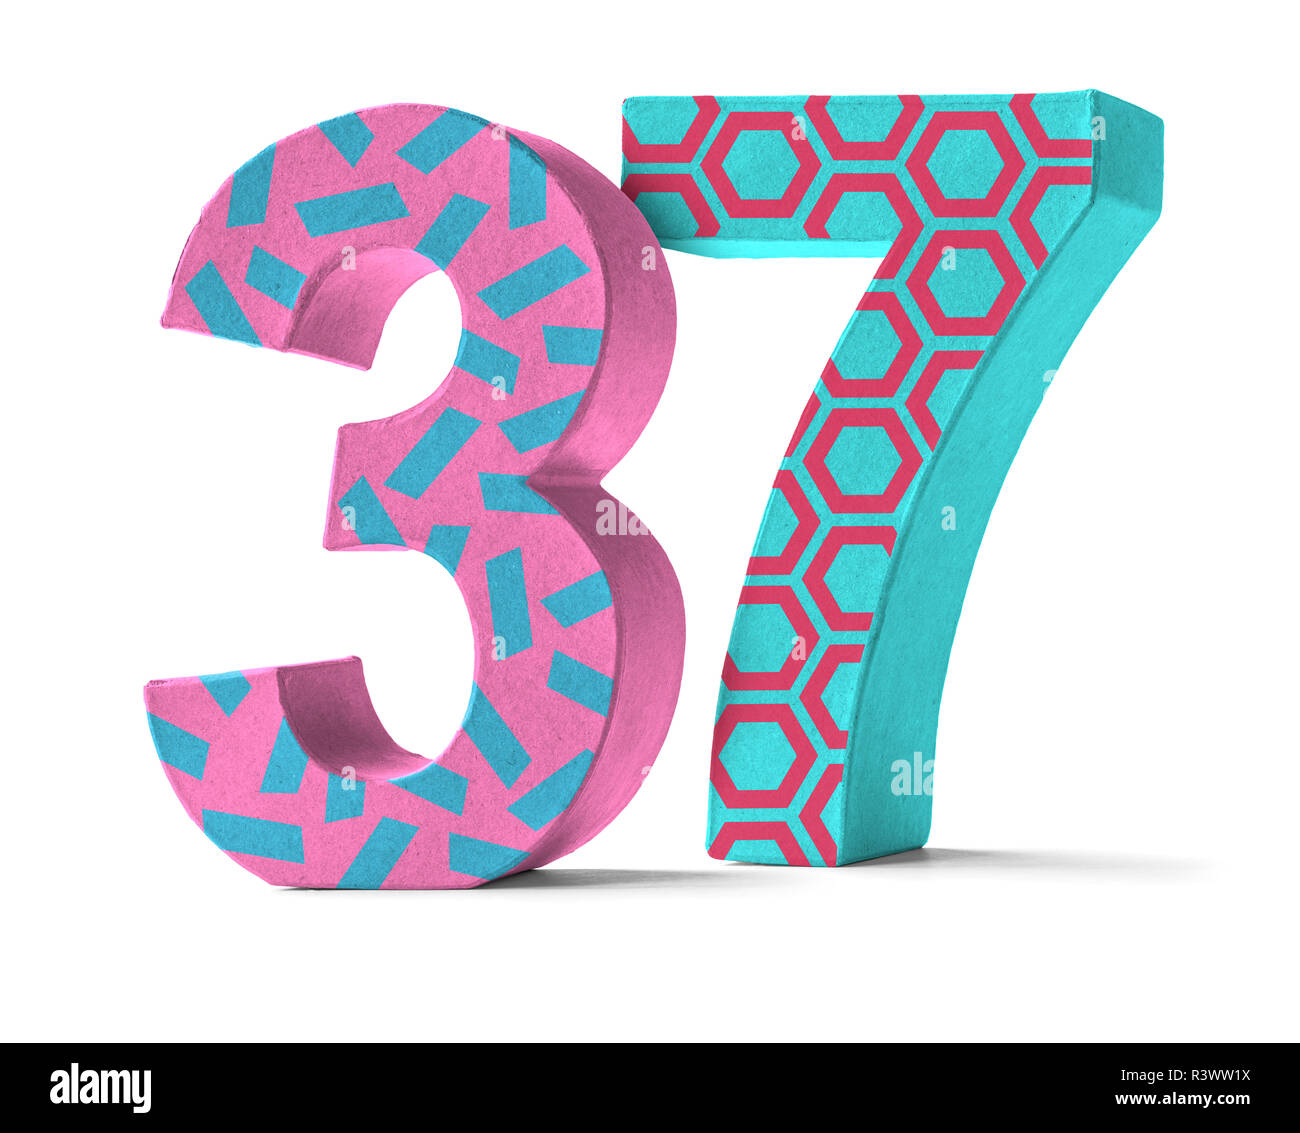 Download free photo of Number,37,thirtyseven,rounded,rectangle - from ...